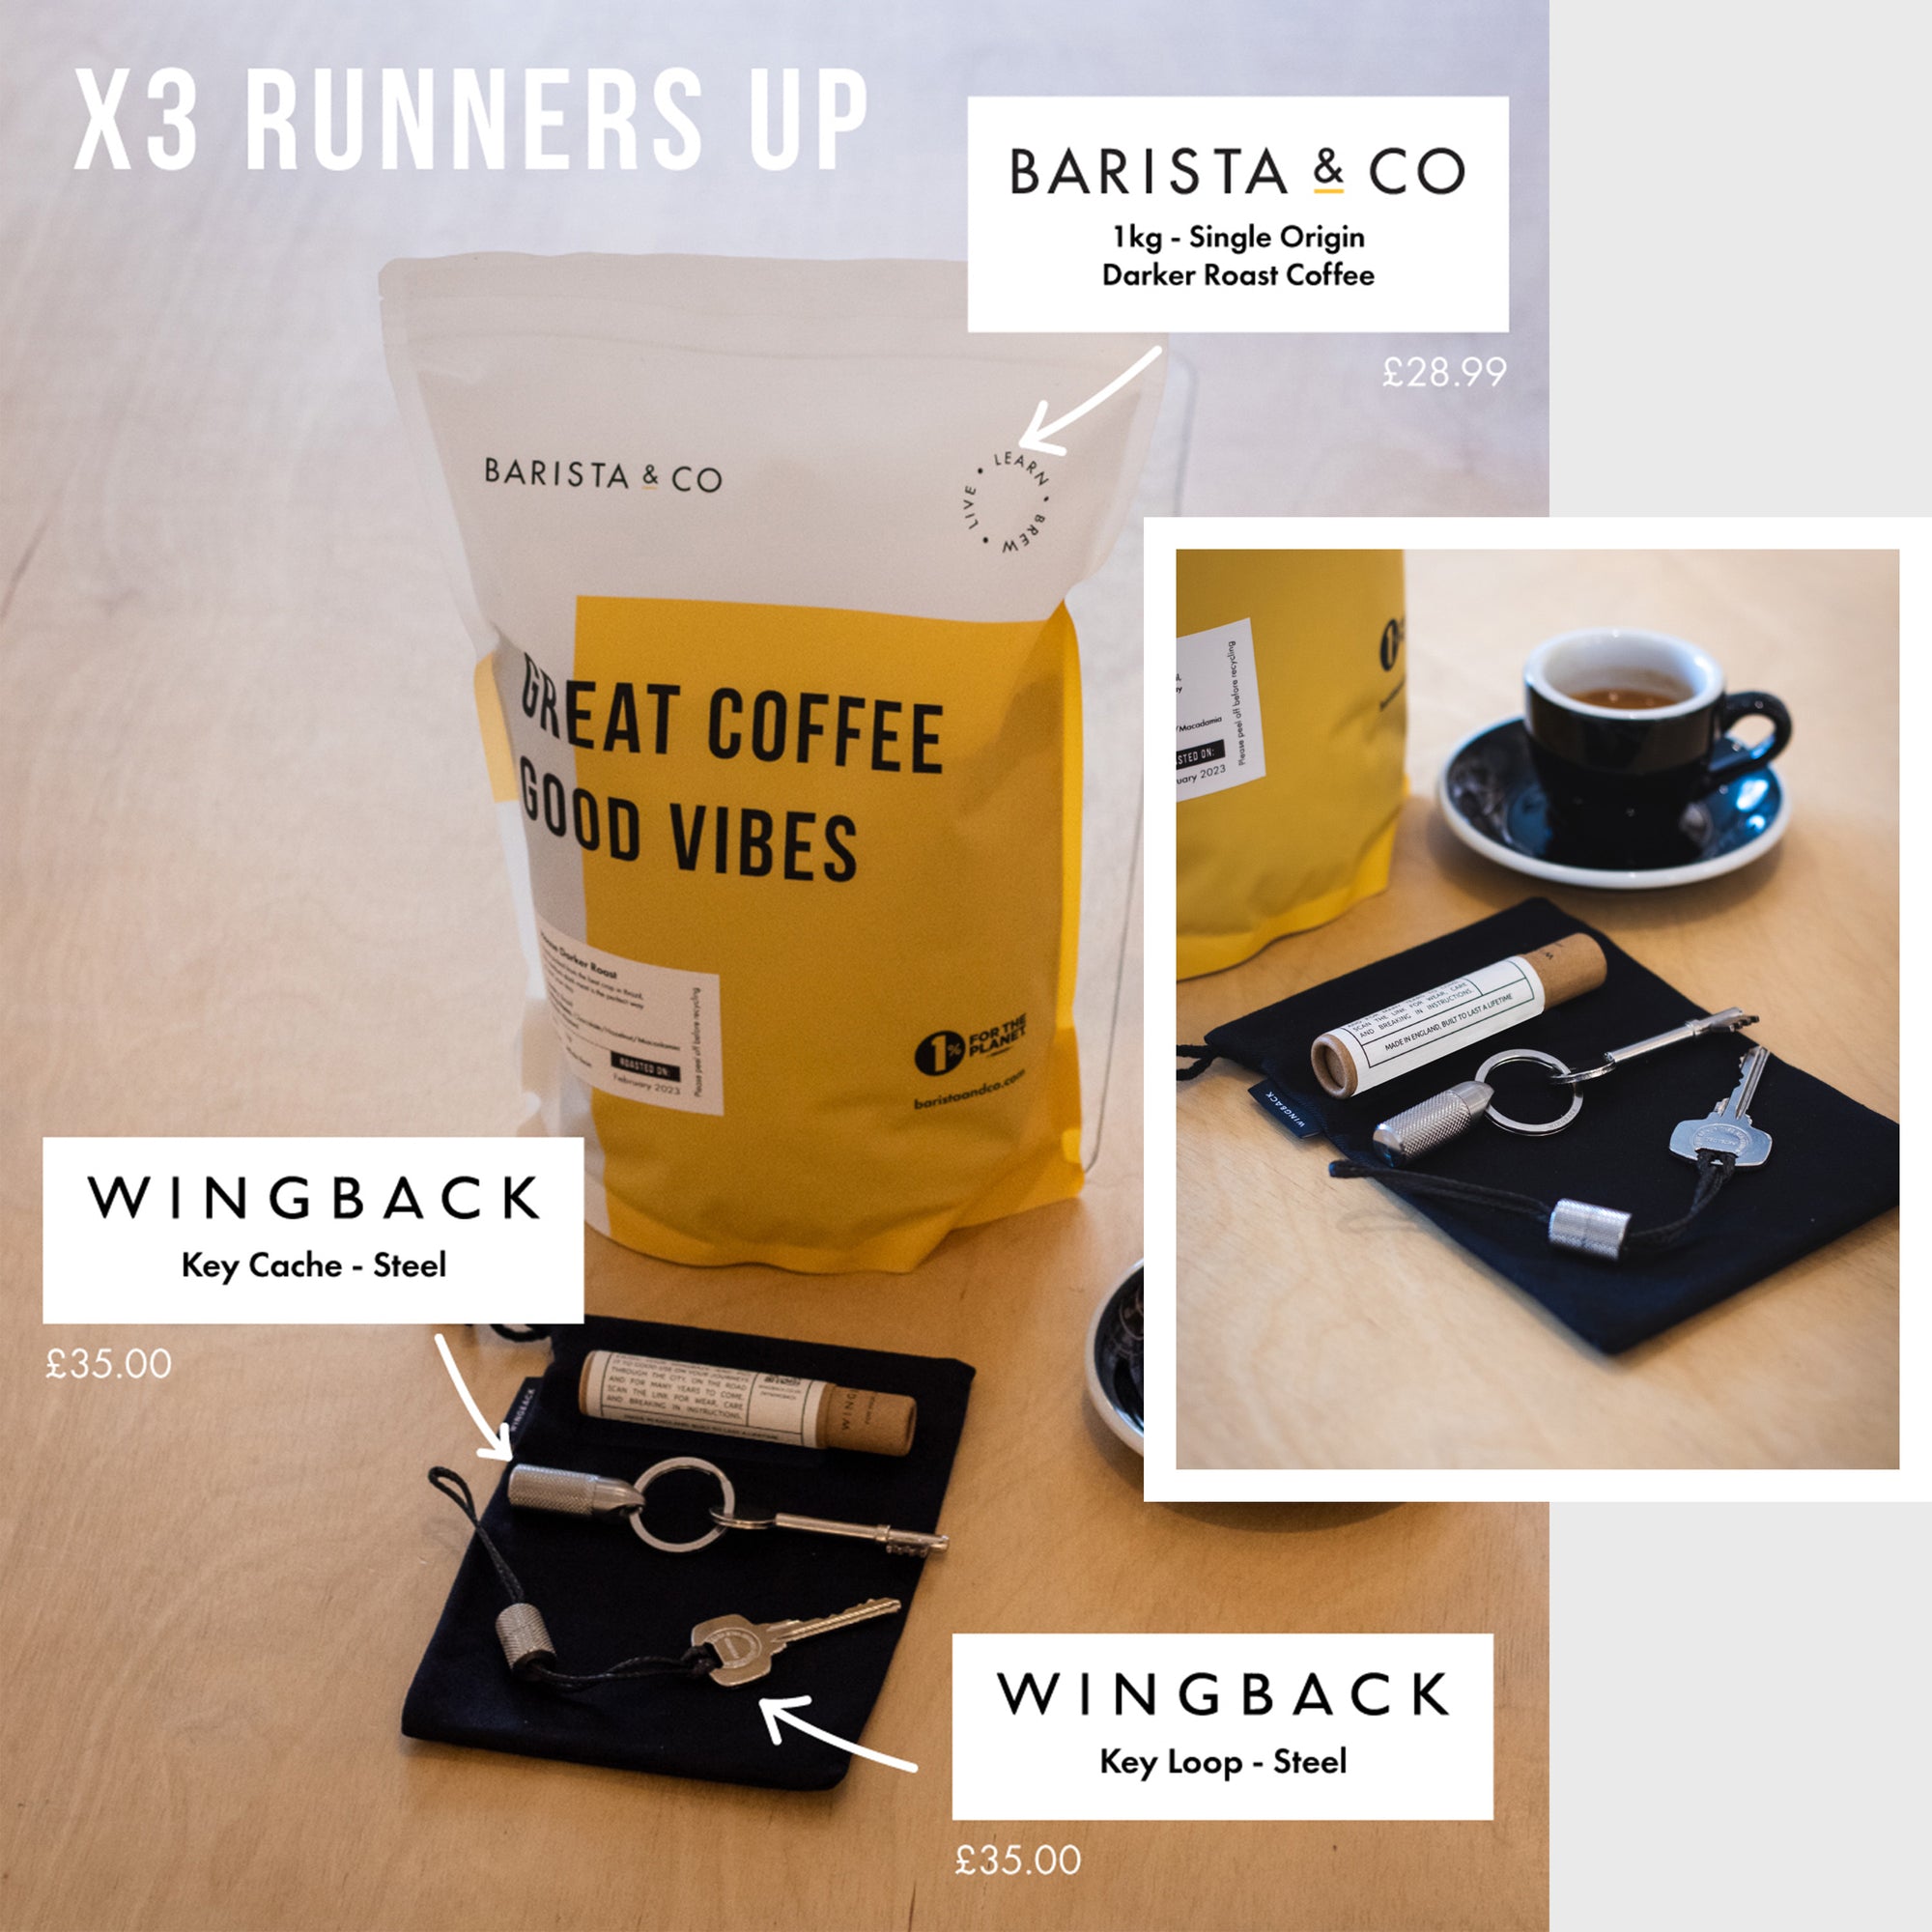 Wingback X Barista & Co Giveaway including Darker Roast coffee, Wingback Key Cache and Key Loop